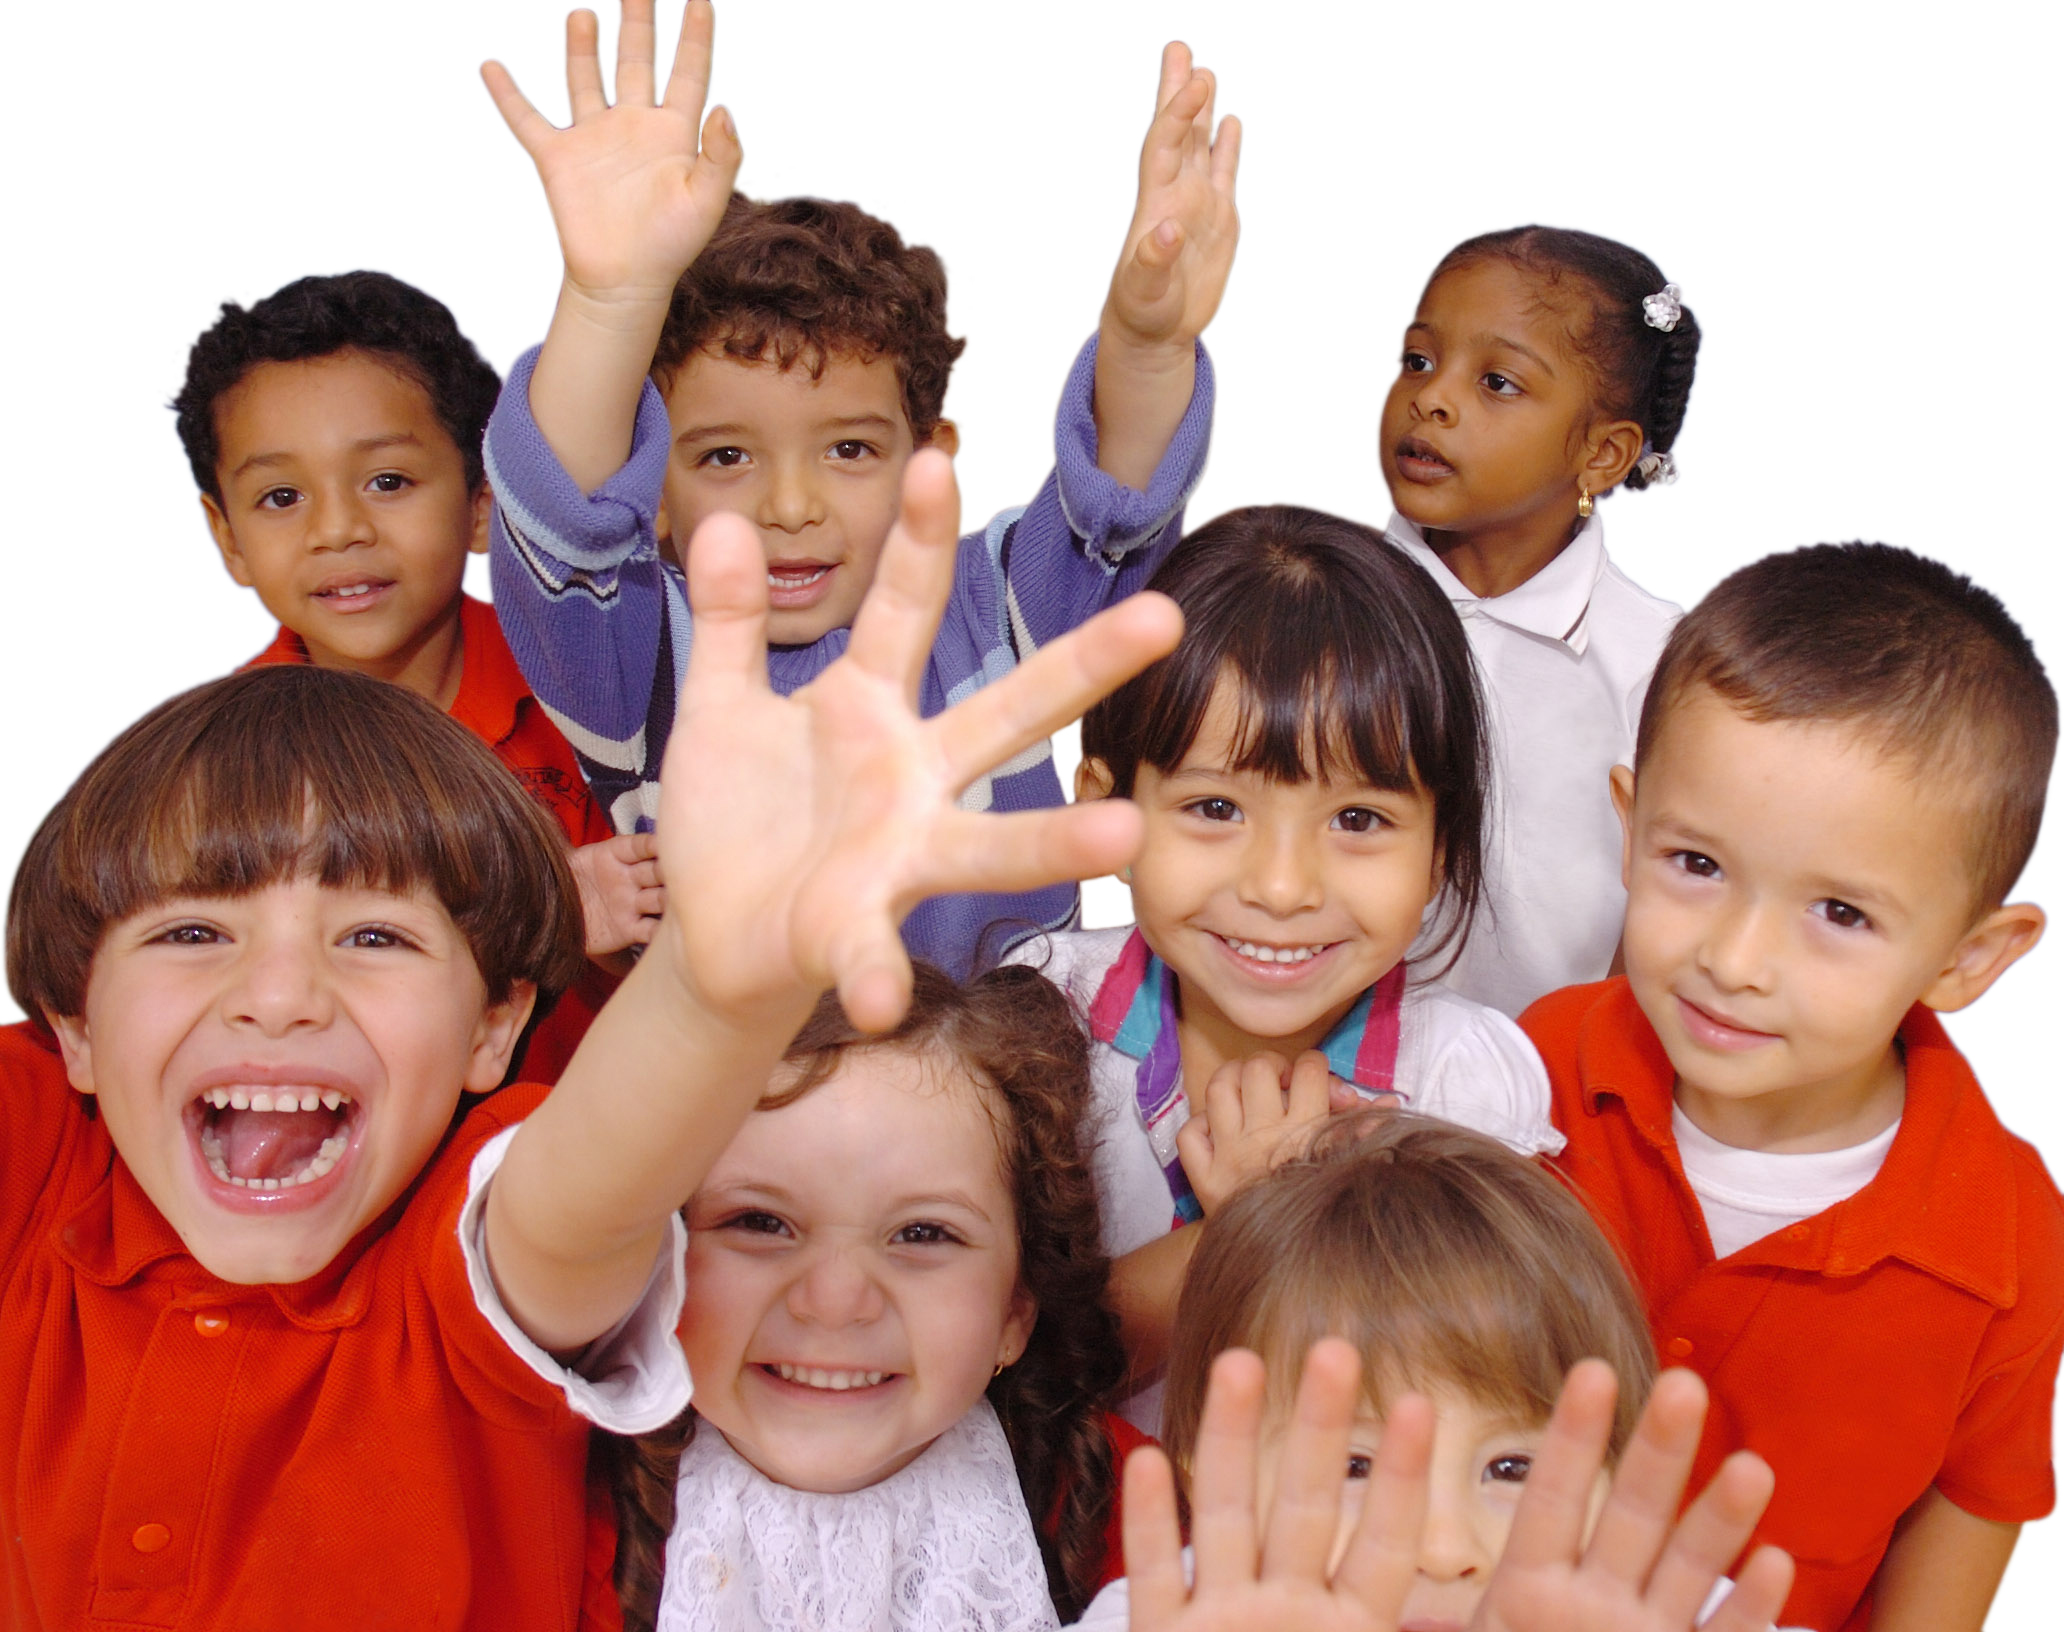 young students smiling and raising their hands towards the camera